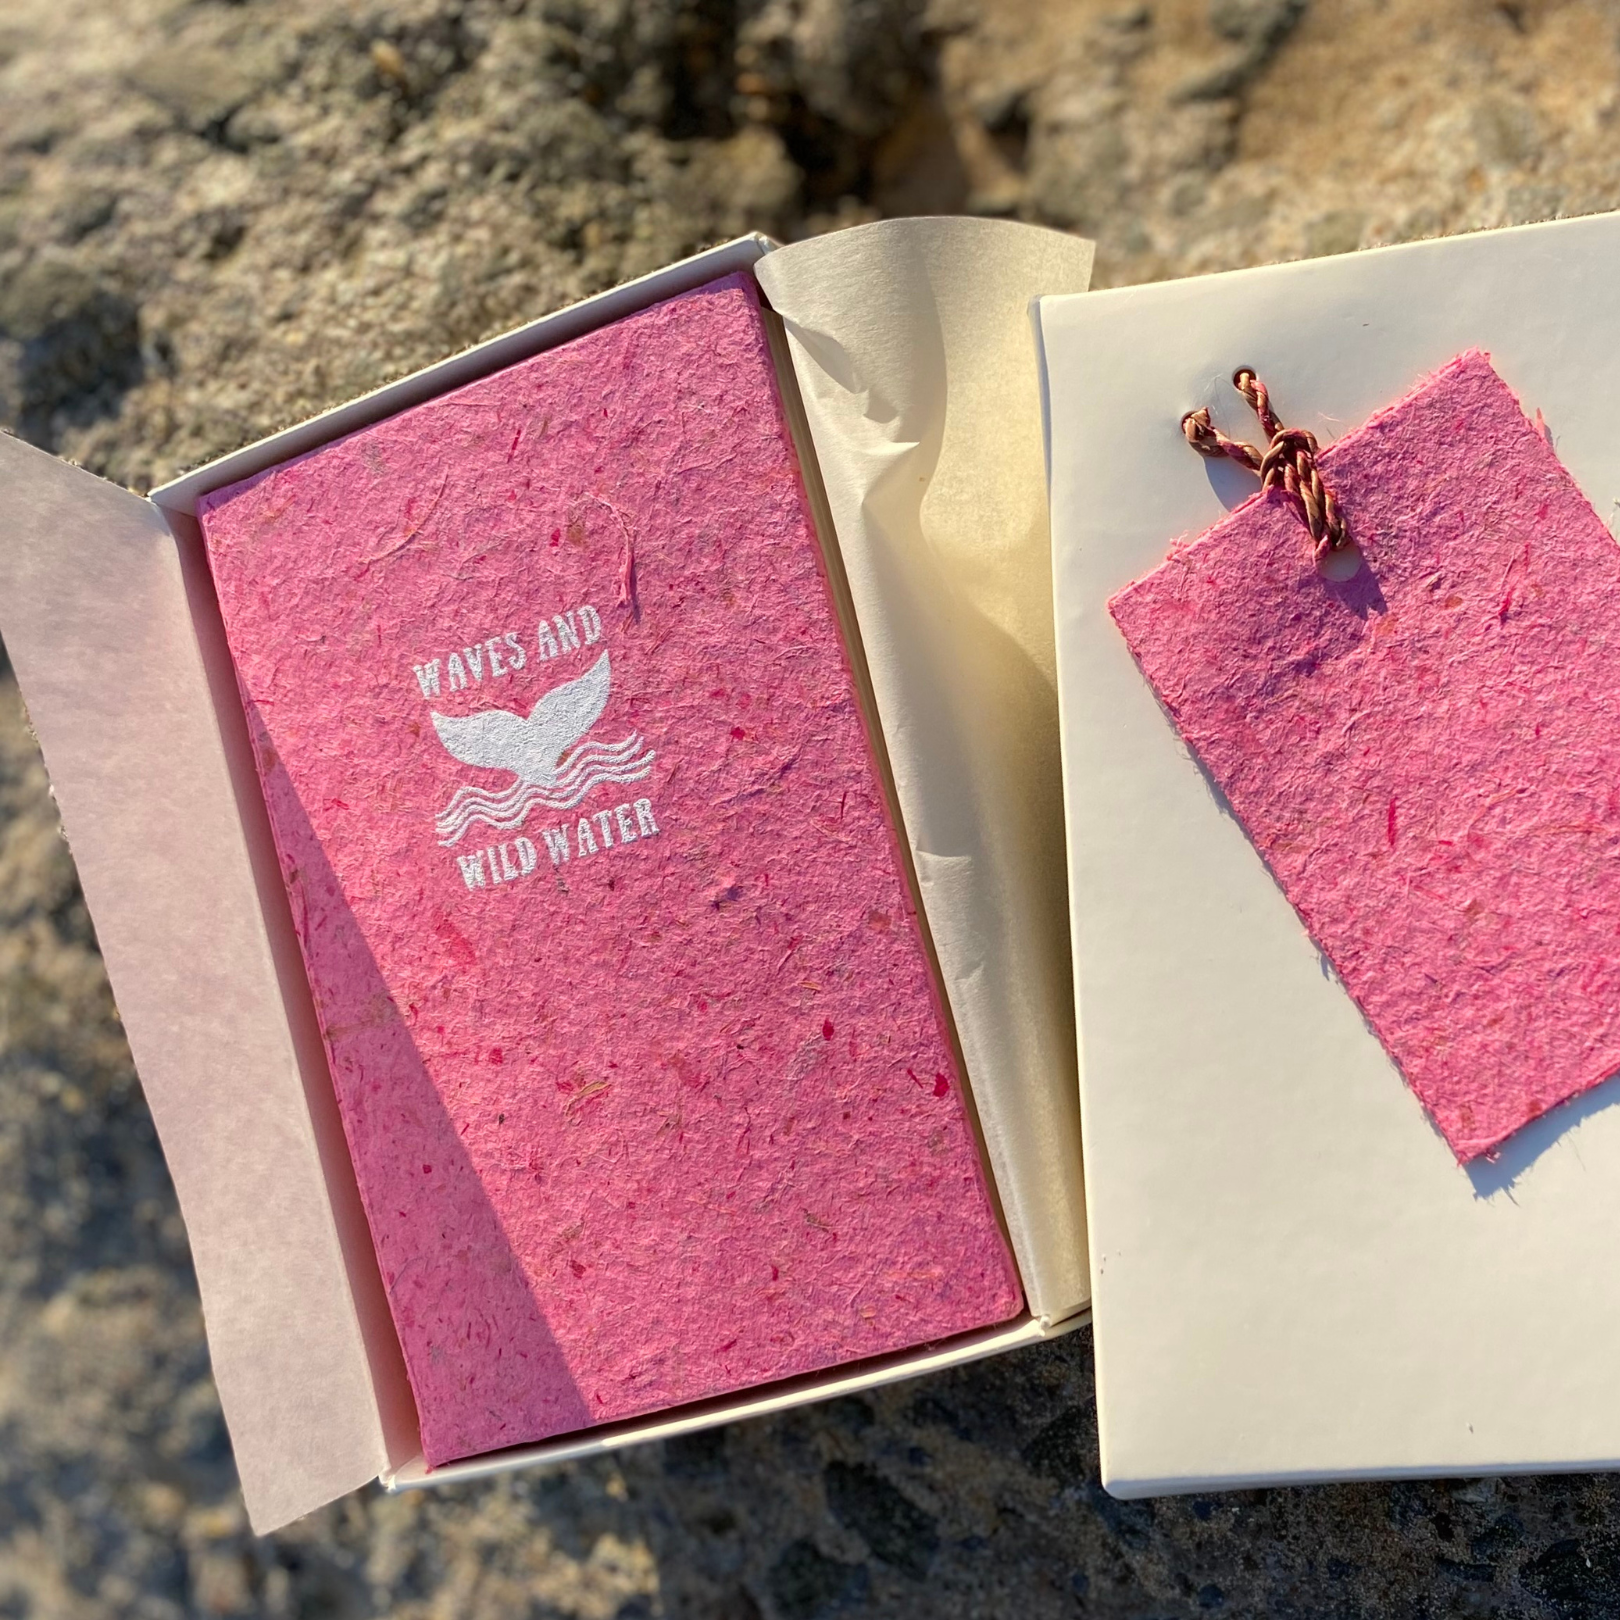 An off-white box with a pink notebook in it.